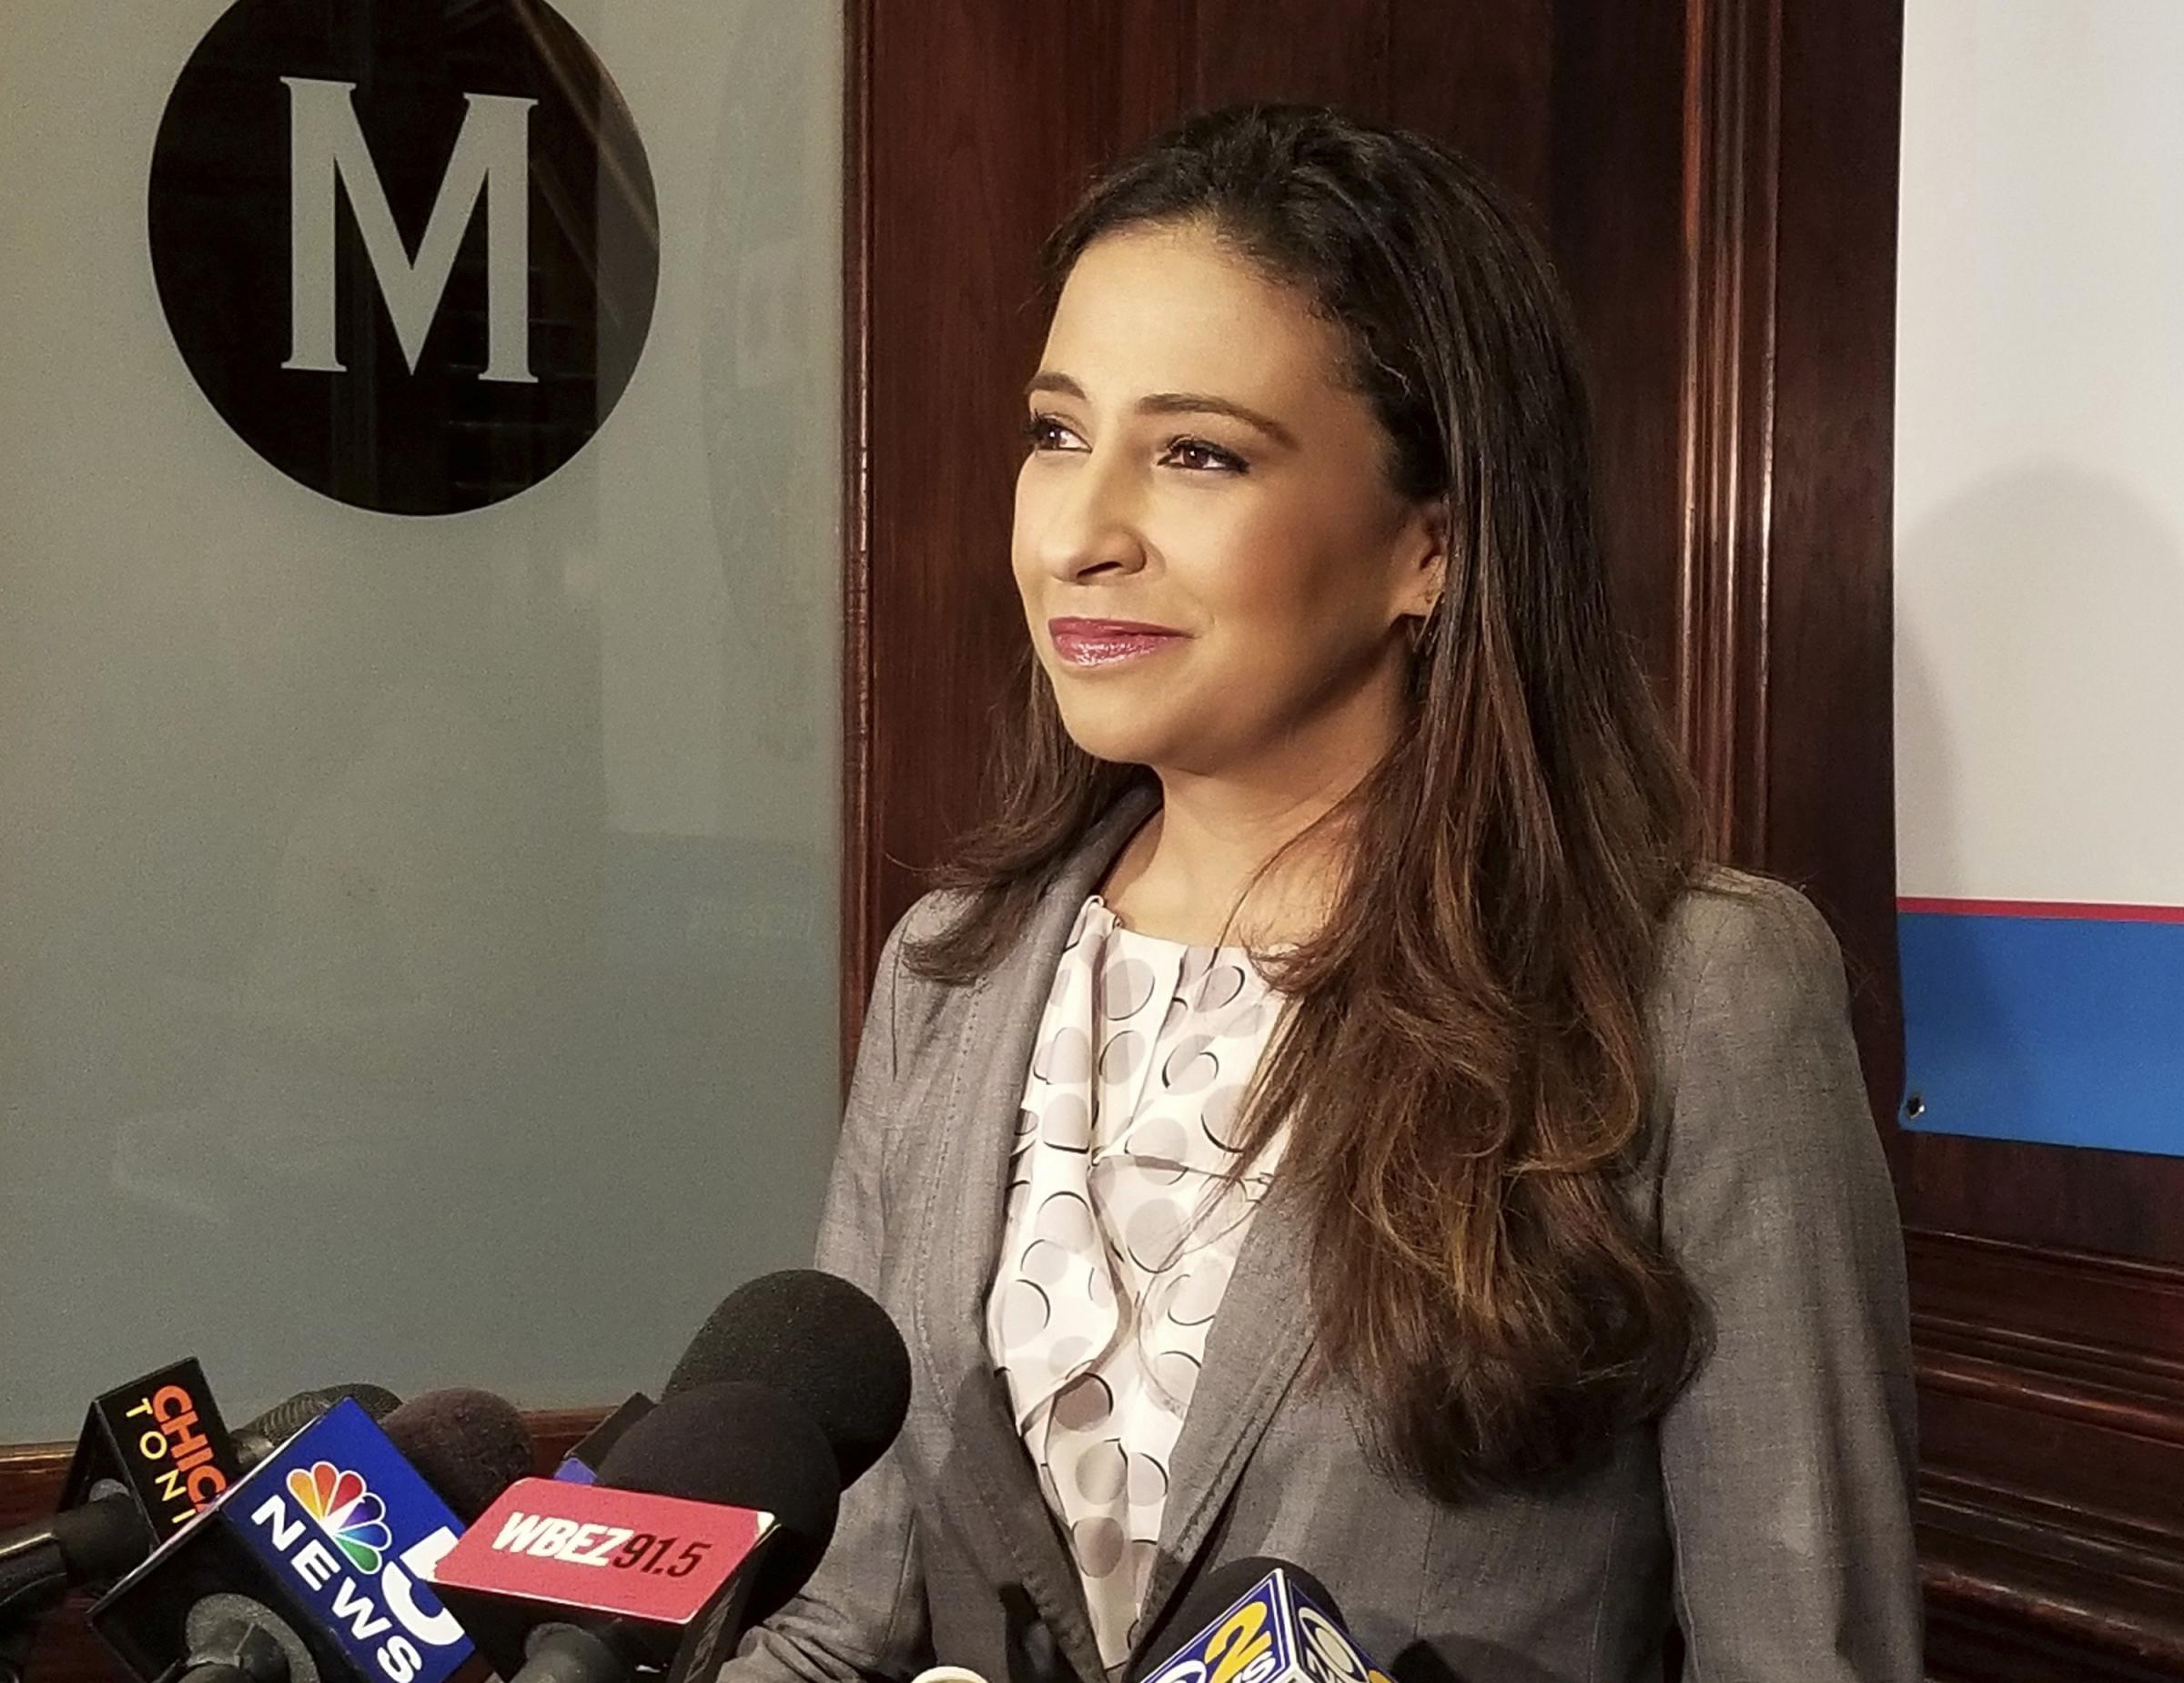 Erika Harold, a Republican candidate for Illinois attorney general, in September 2017 in Chicago.